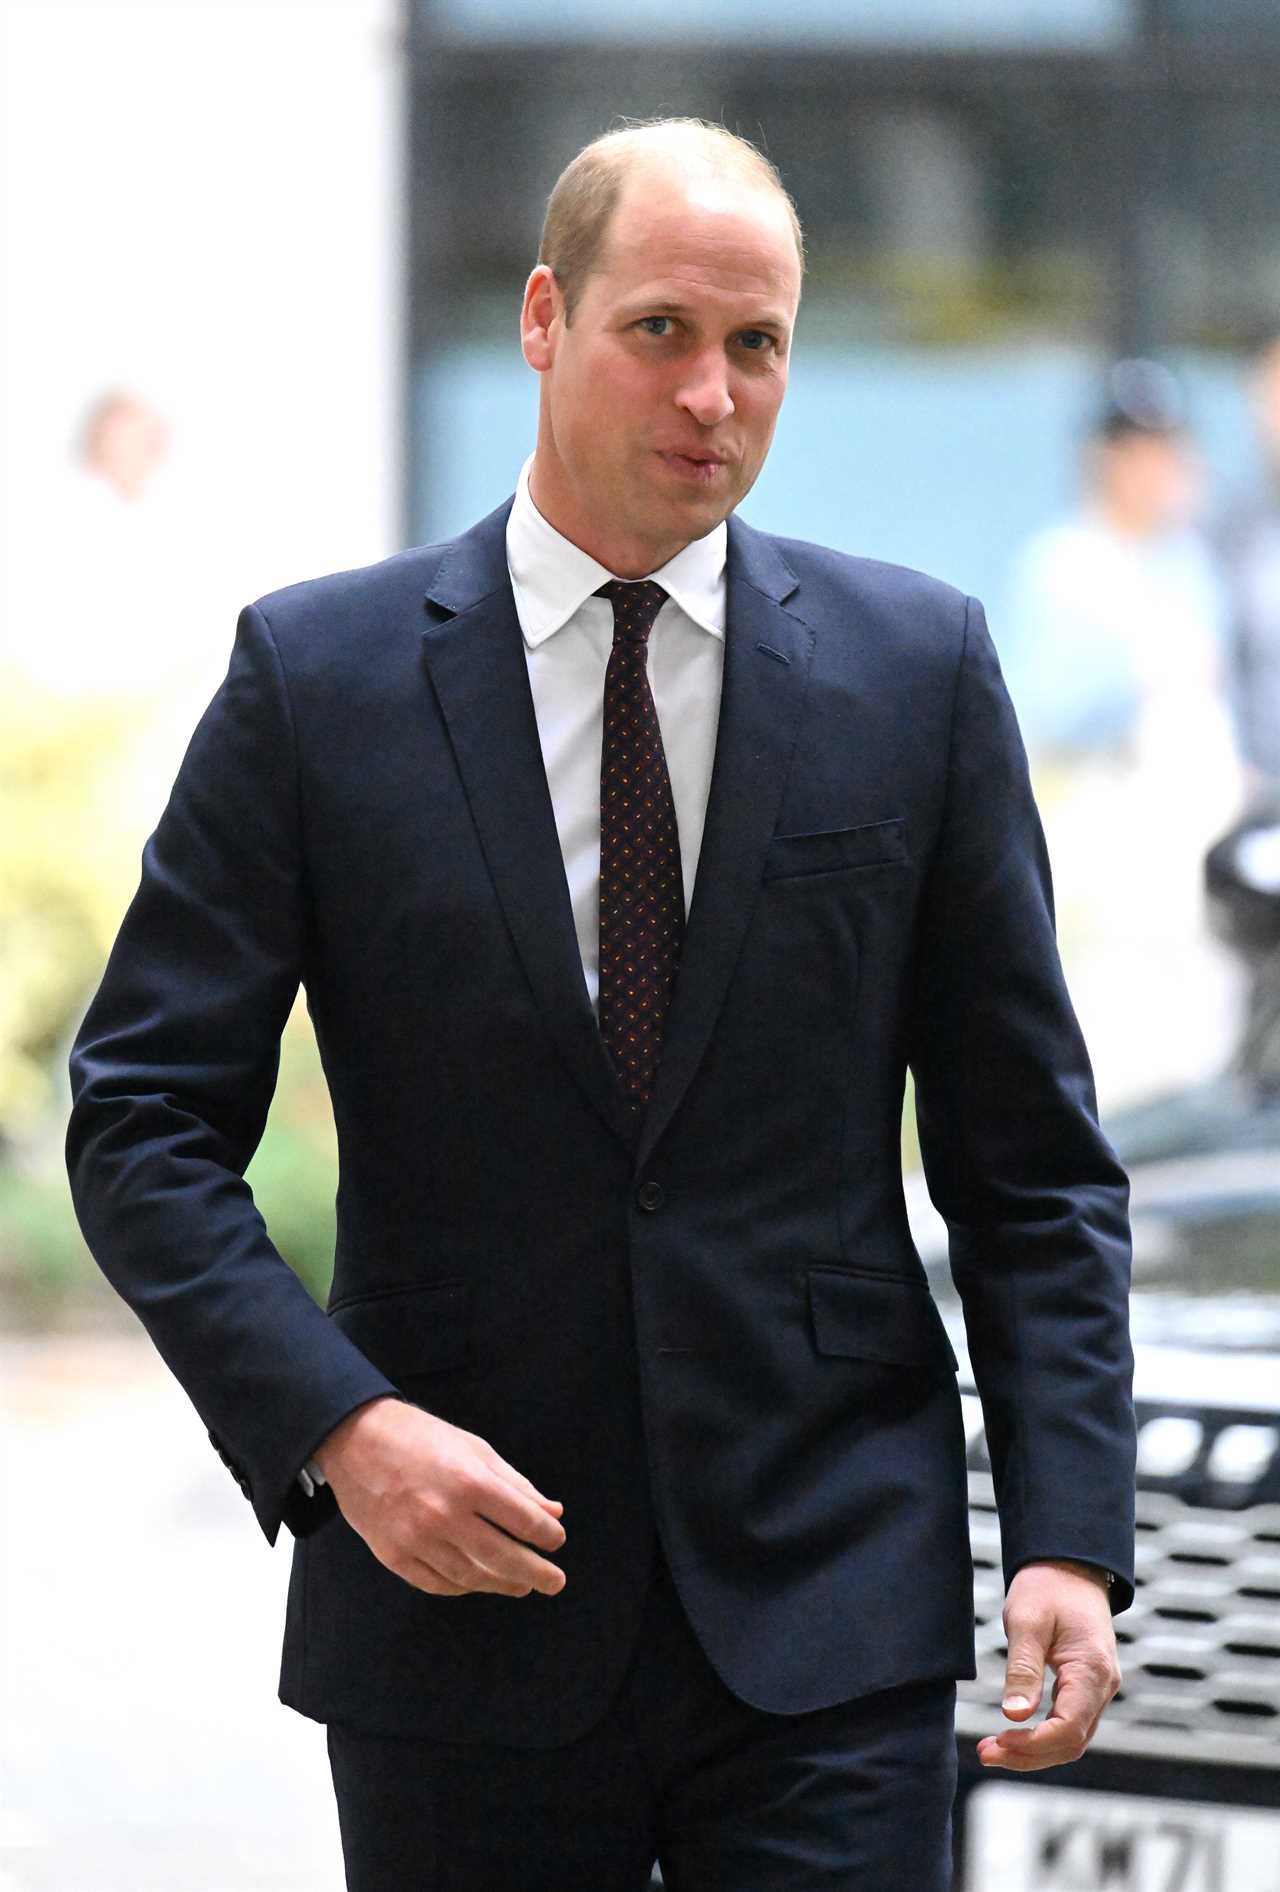 Where did Prince William go to school and what did he study at university?